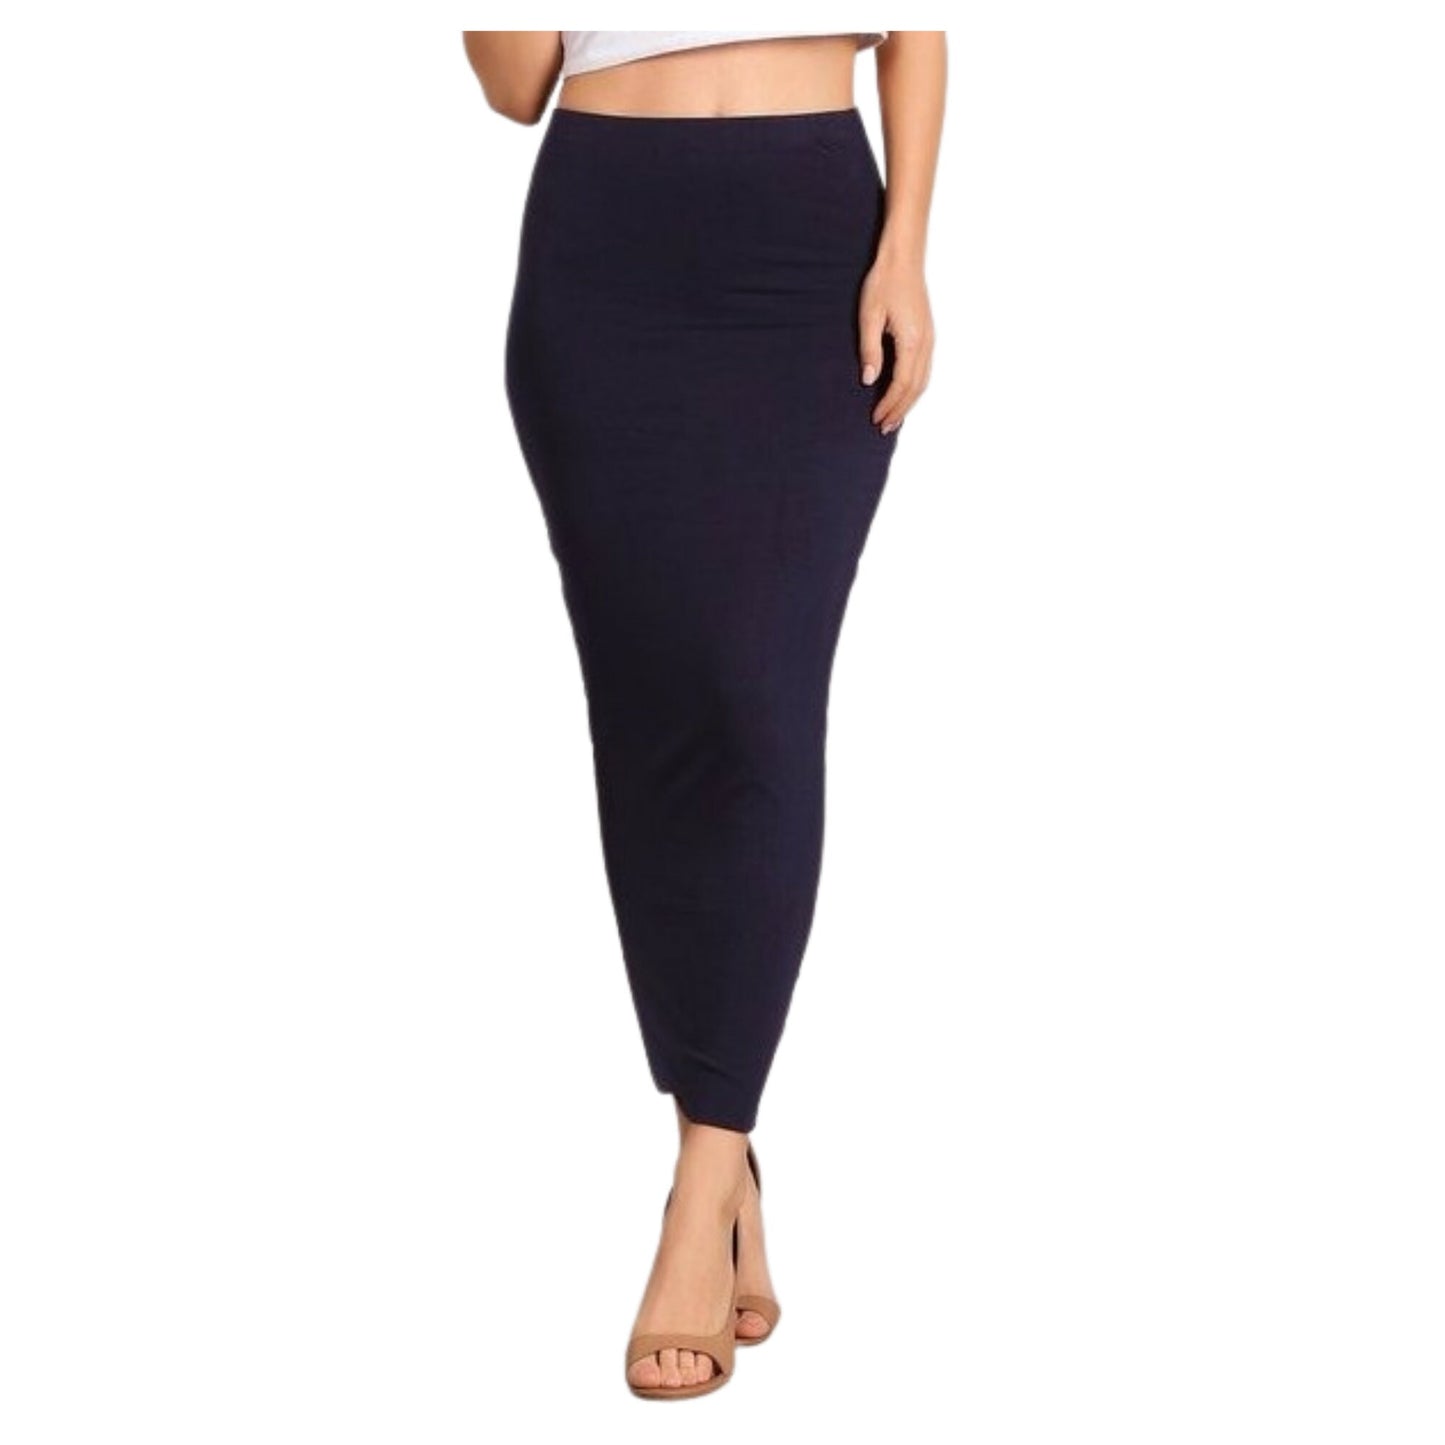 Double Layer No Slit Long Midi Pencil Skirt. Super Sexy with Great Silhouette. Navy Blue. Not See Thru. Lyrca for Stretch. Great for Modesty